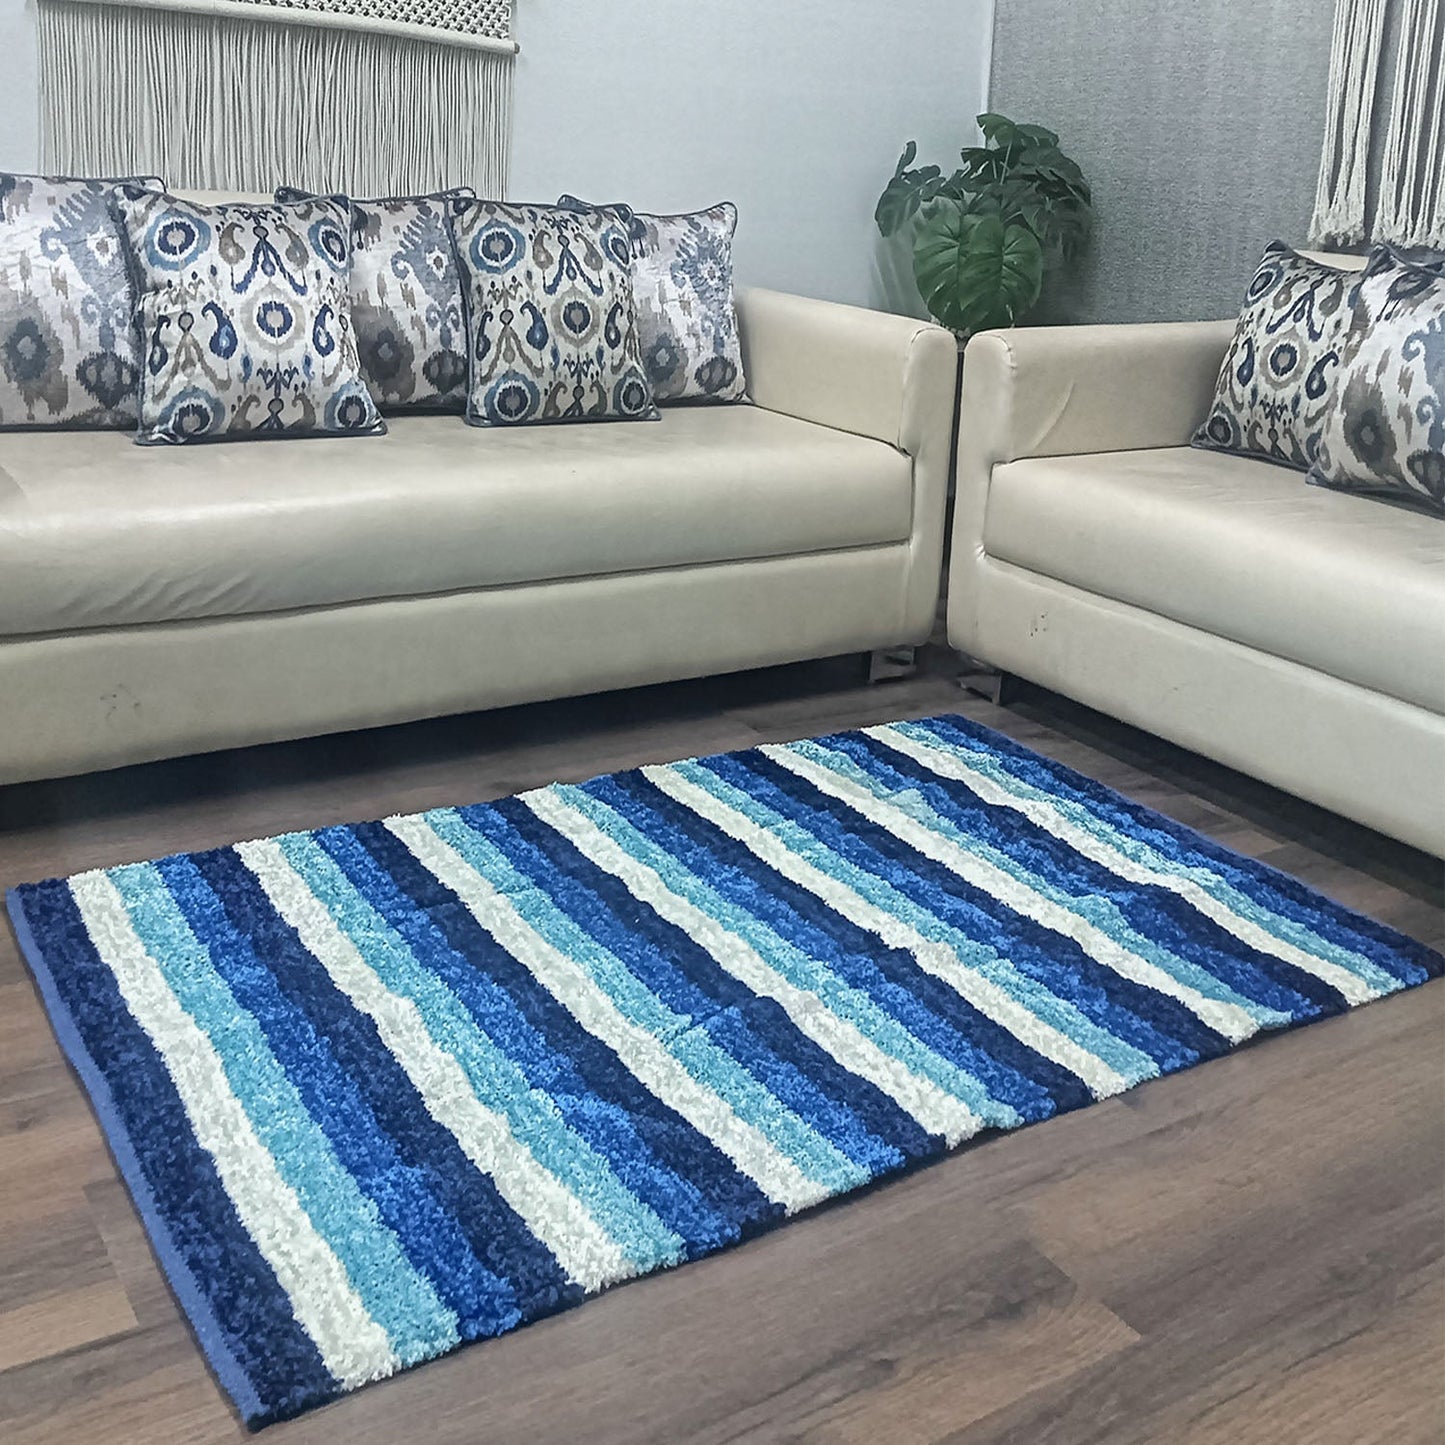 Avioni Handloom Cut Shuttle Rugs by Master Artisans | Feather like Luxurious Silk Soft Touch | Home Washable | Stripes in Shades of Blue and White | Reversible - 3 feet x 5 feet (~90 cm x 150 cm)